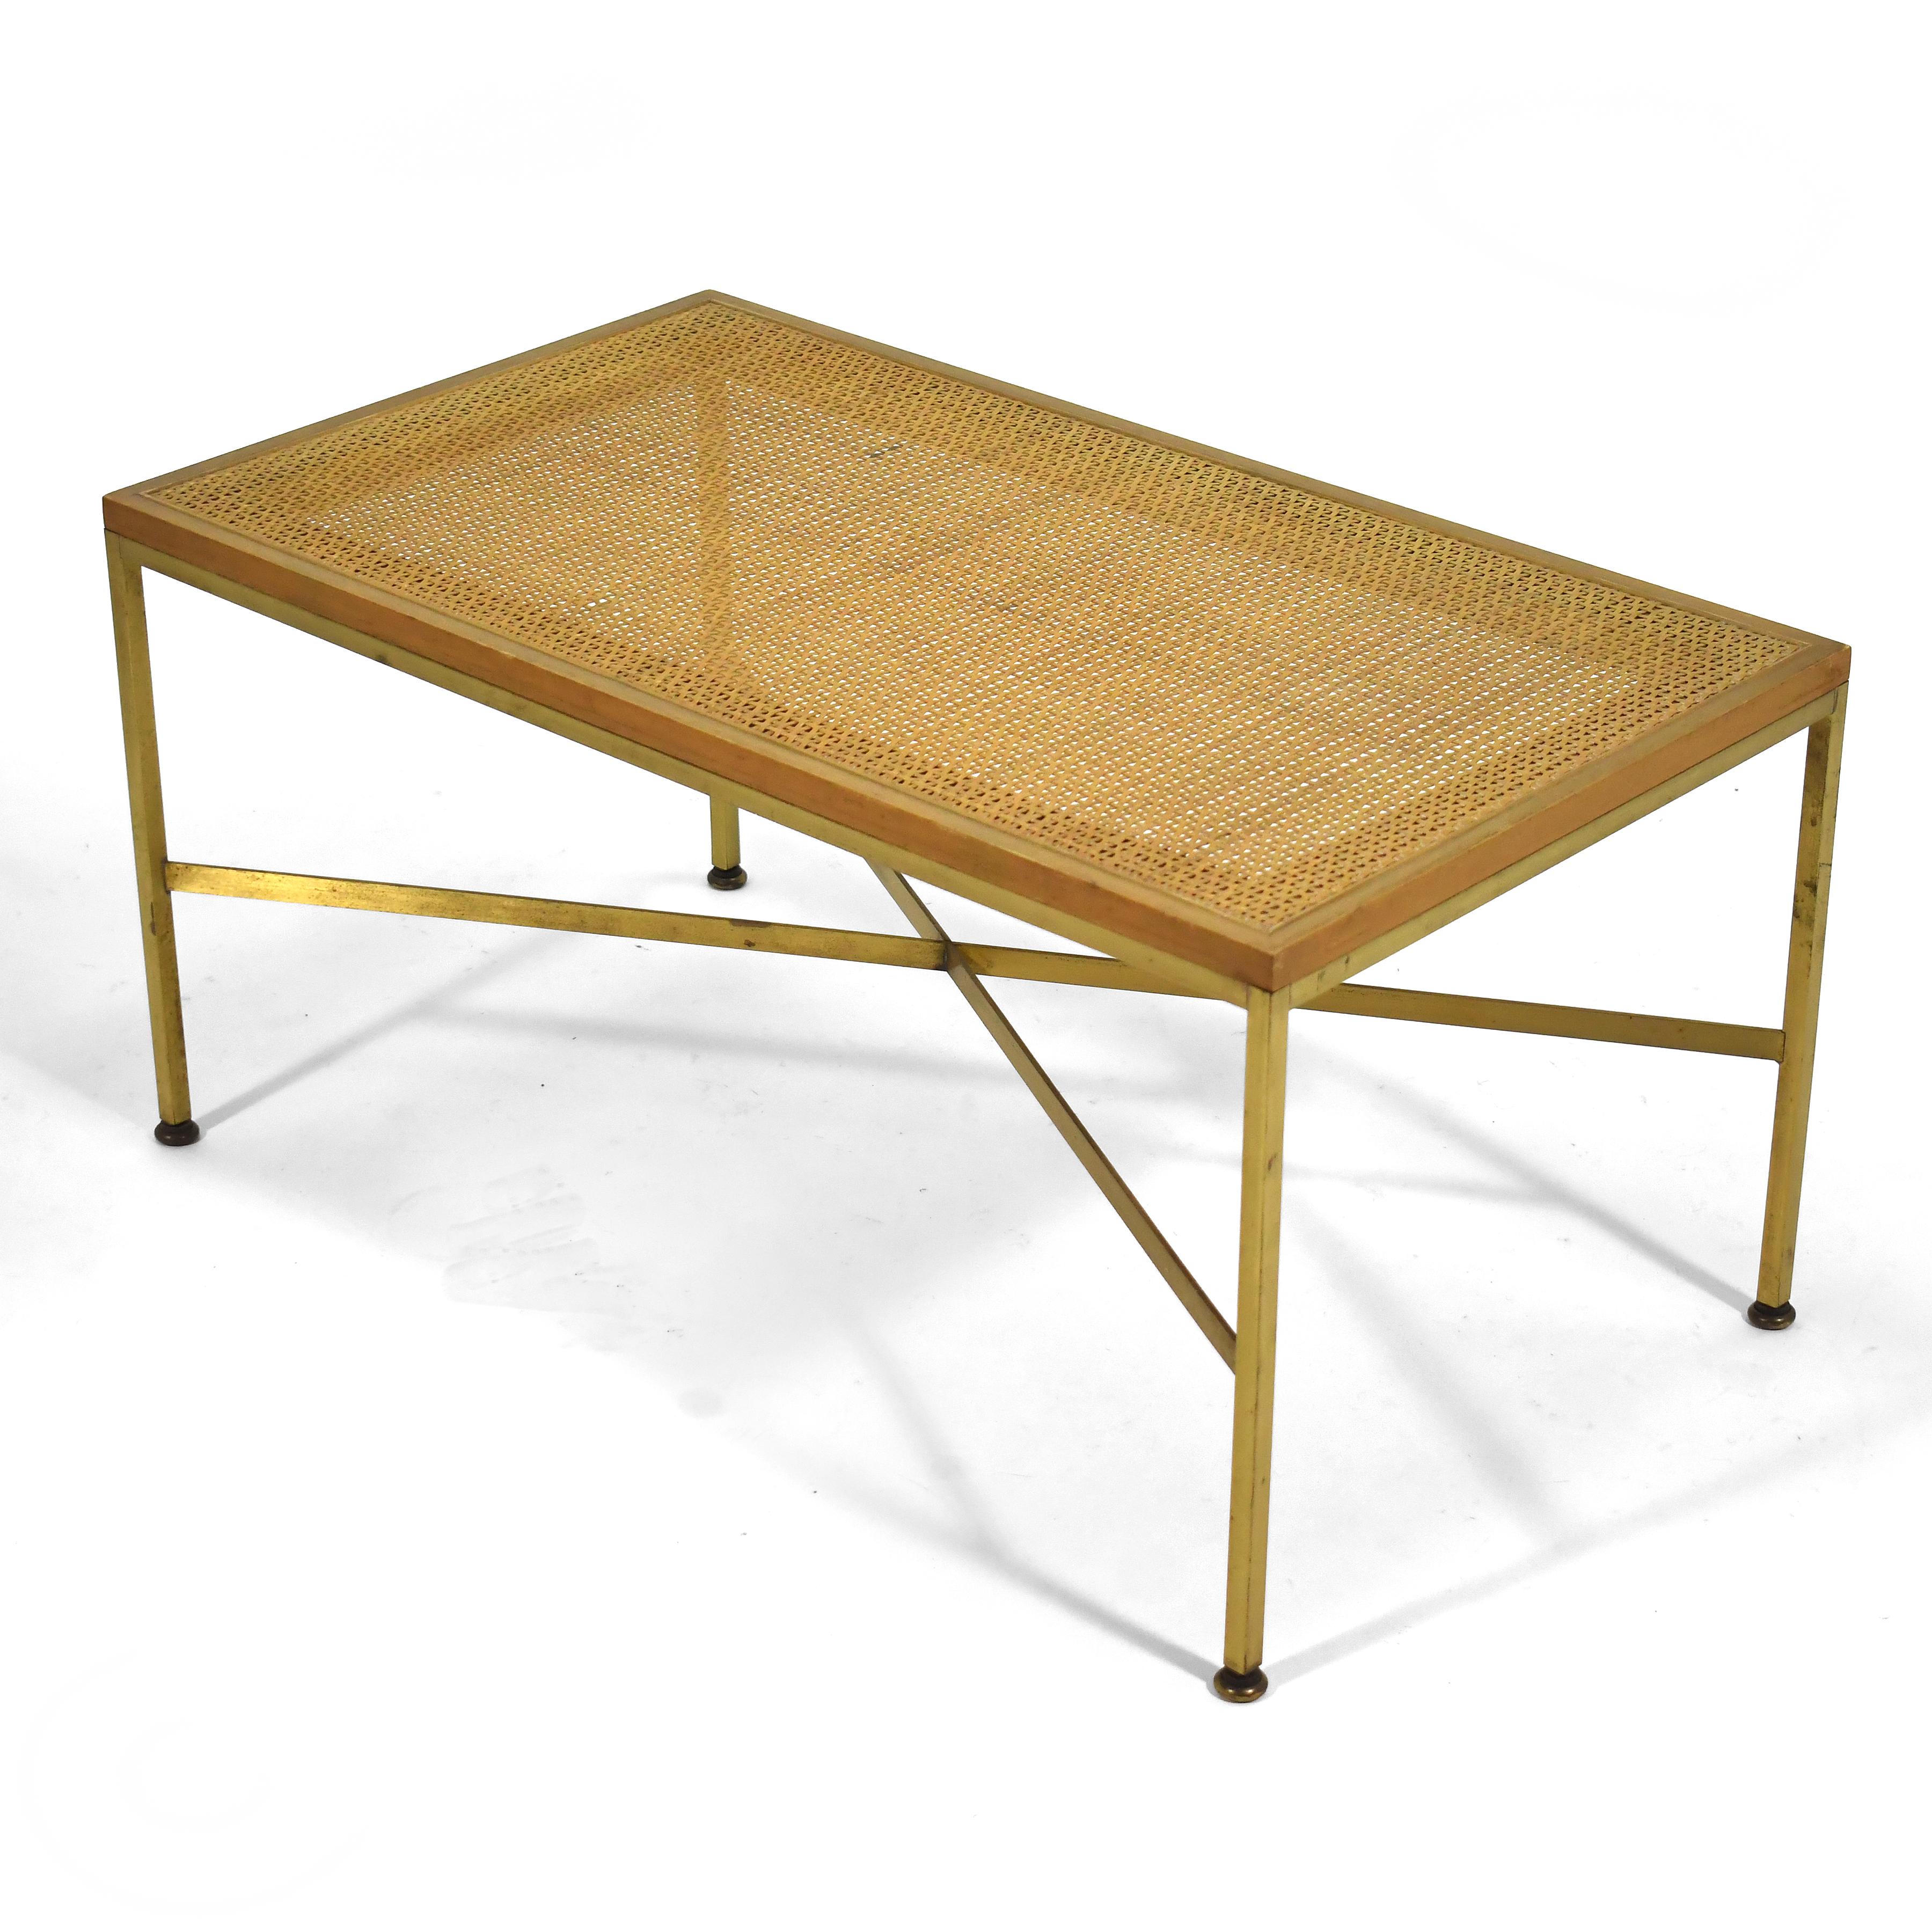 This lovely model 7709 Paul McCobb bench, is light and elegant. The brass bass with its X shaped stretchers supports a walnut and cane top. Comfort can be increased with the addition of an upholstered cushion, and while designed as a bench, this